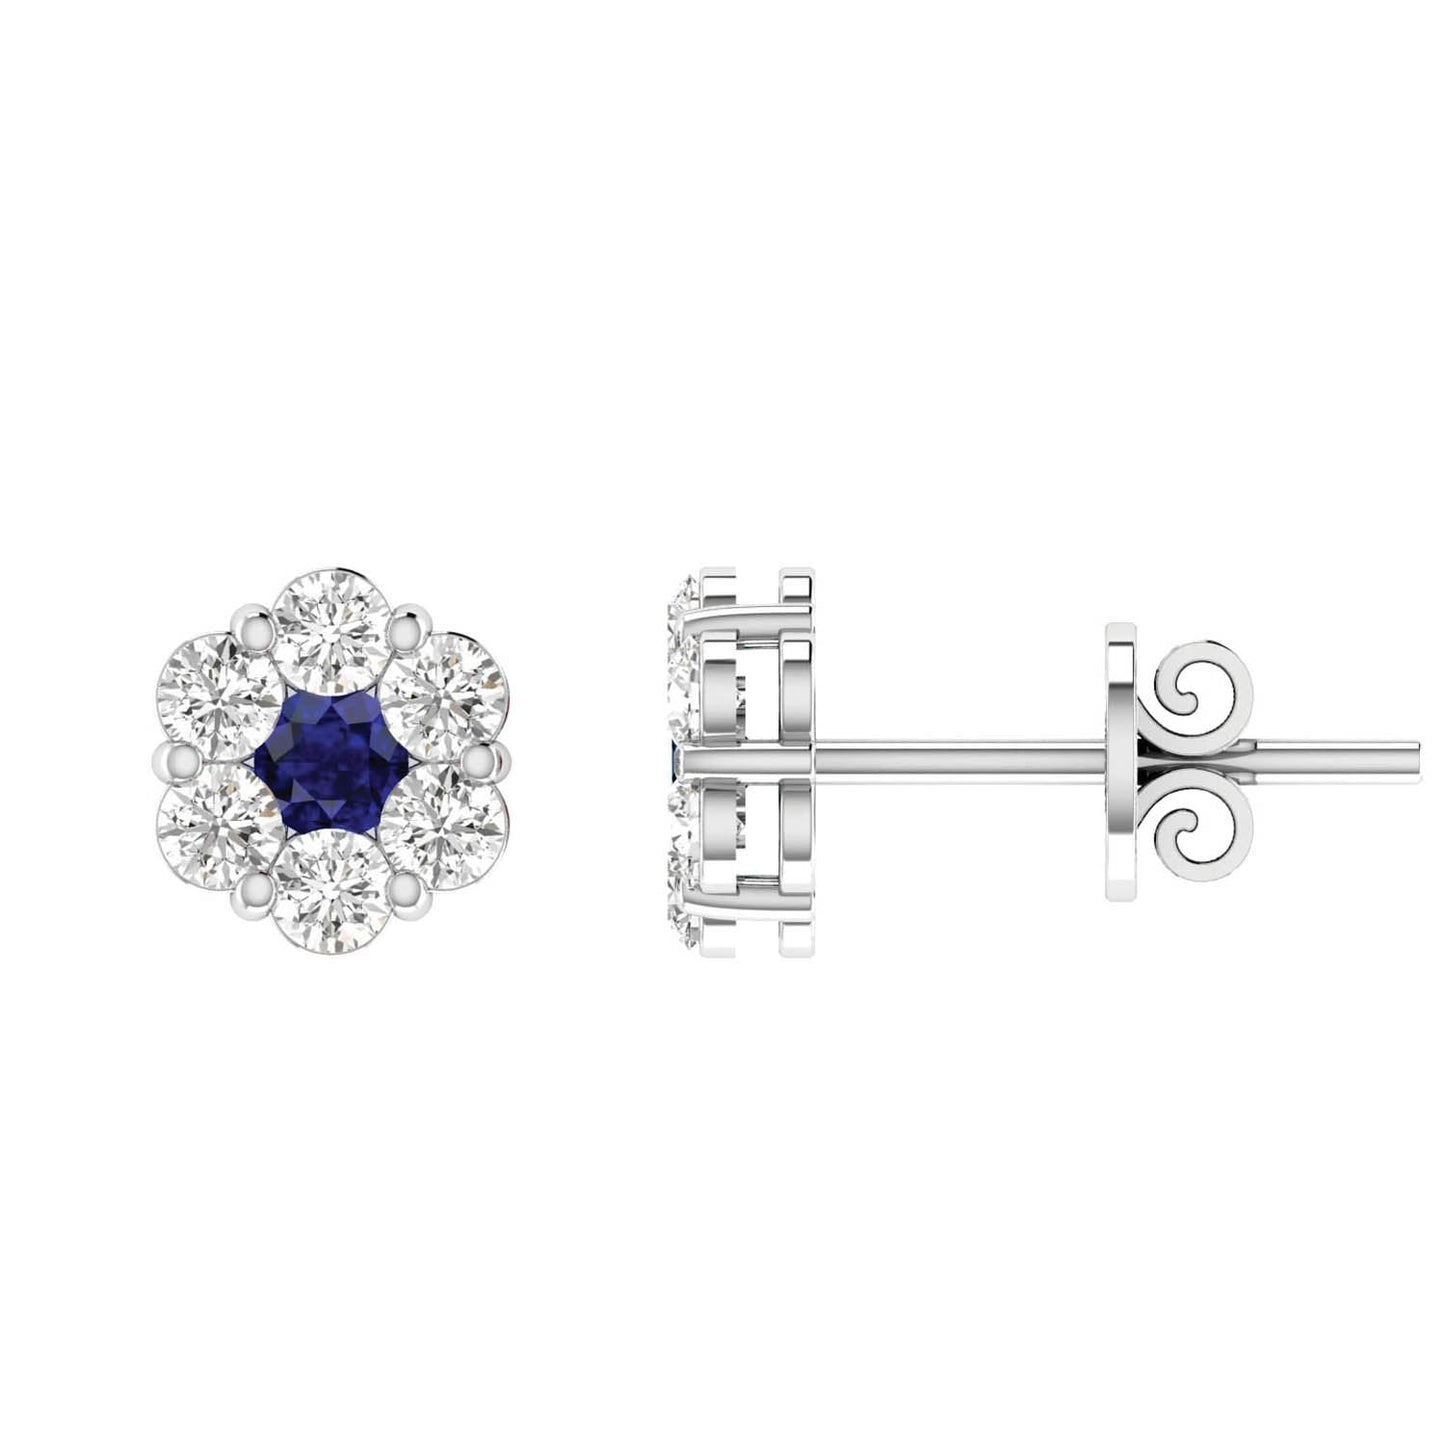 Sapphire Diamond Stud Earrings with 0.24ct Diamonds in 9K White Gold - 9WRE33GHS